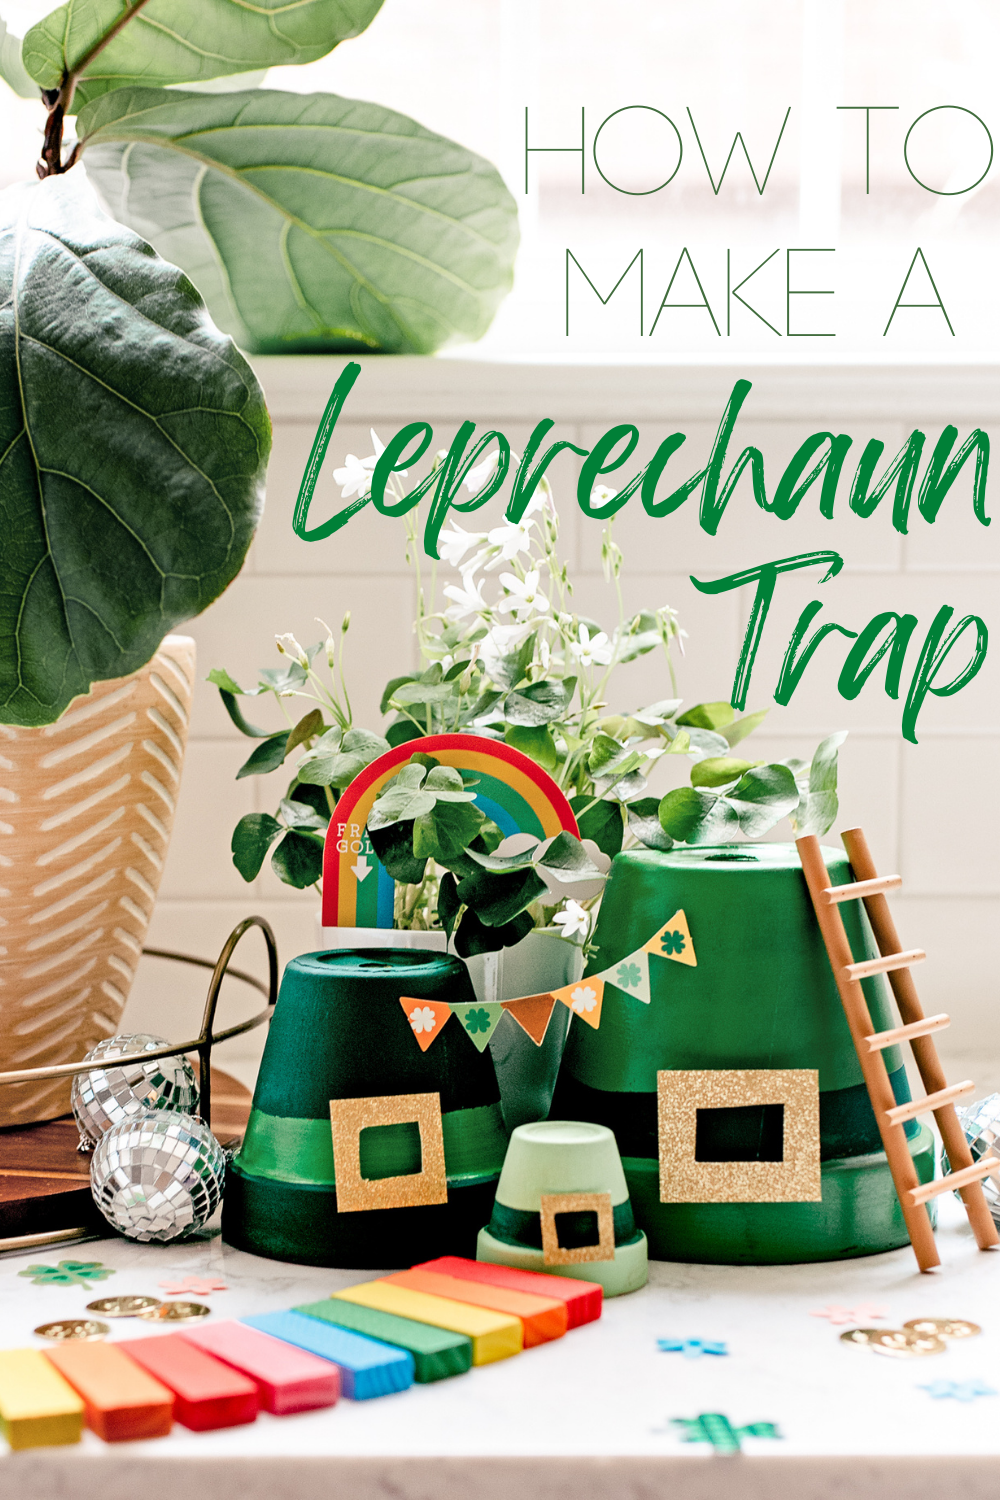 Help the kids make a leprechaun trap! These 6 ideas are simply adorable